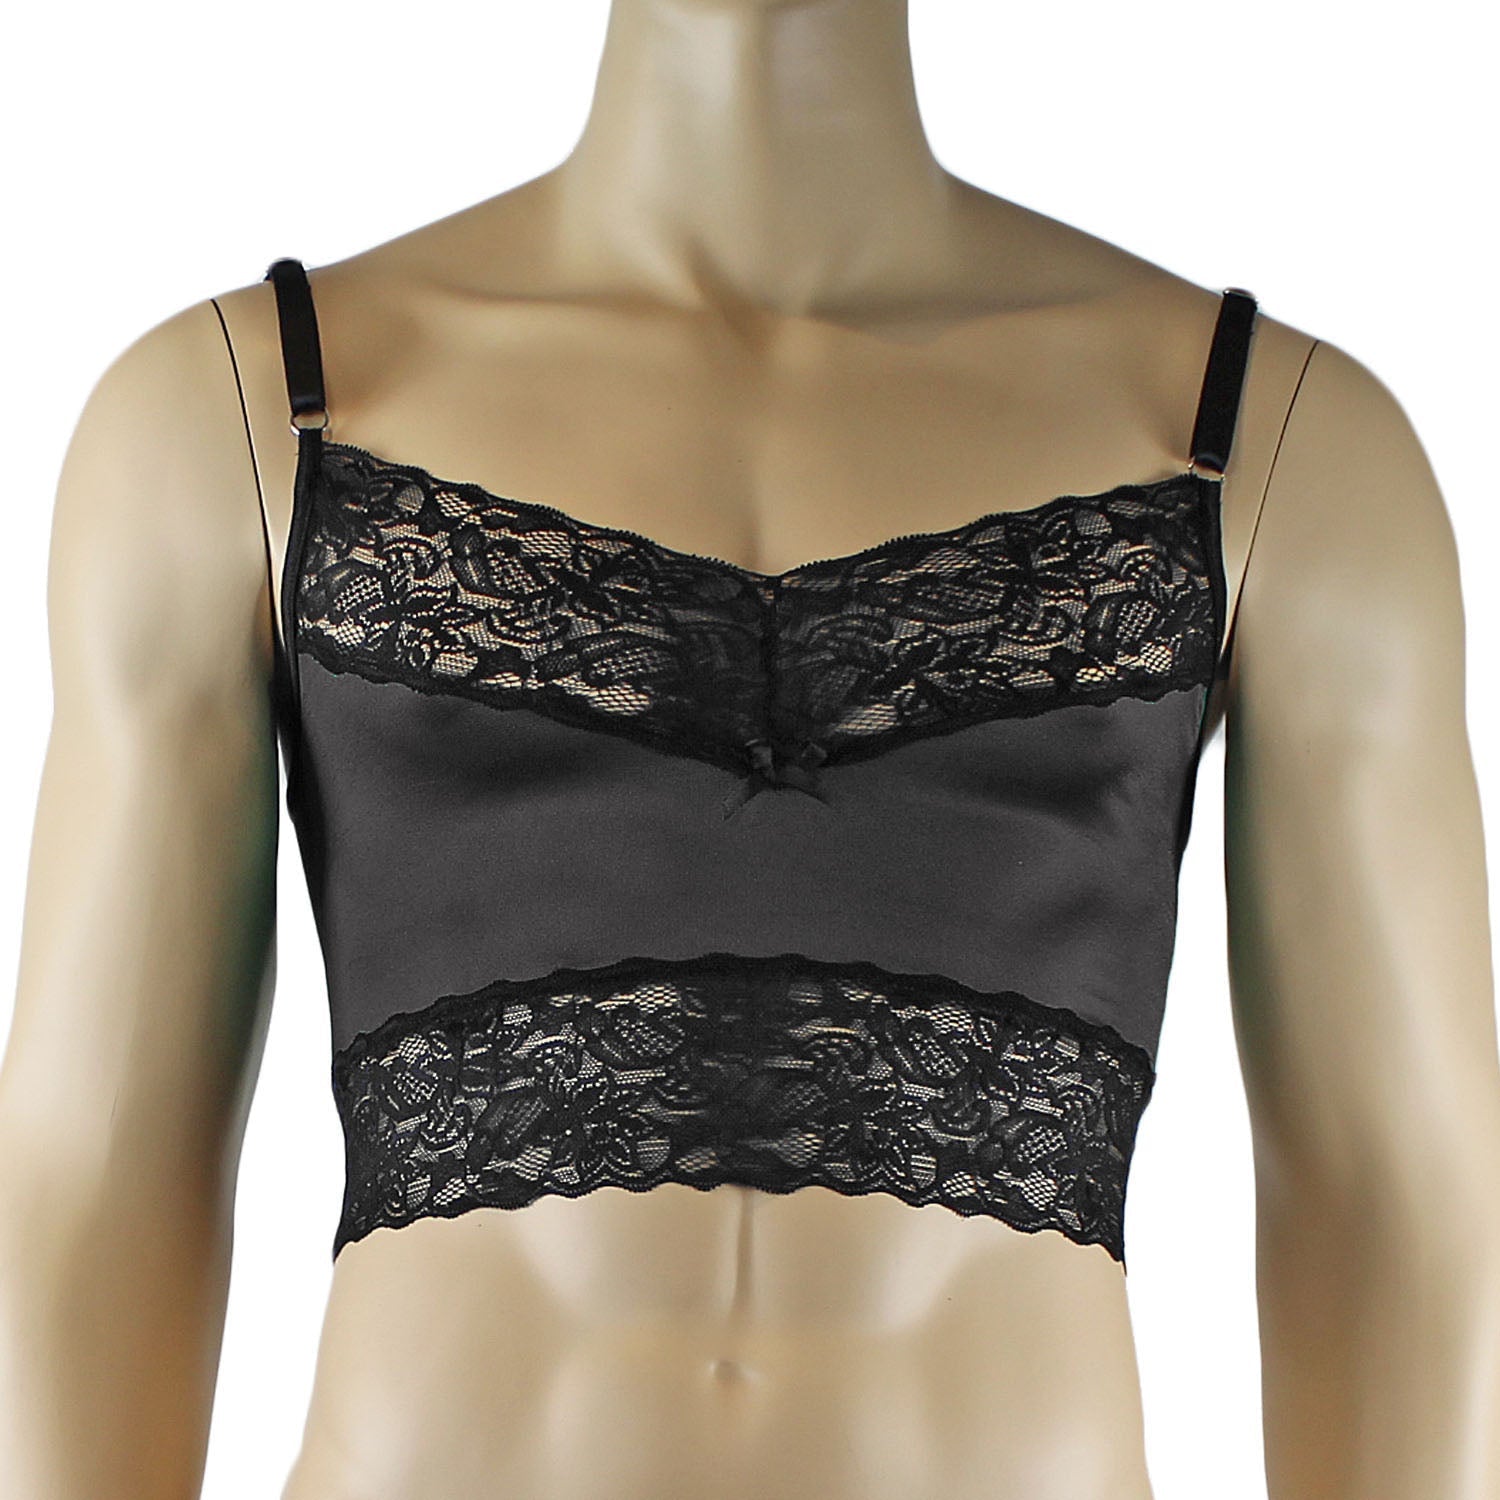 Mens Glamour Camisole Top with Lace Trim - Sizes up to 3XL Black & Black